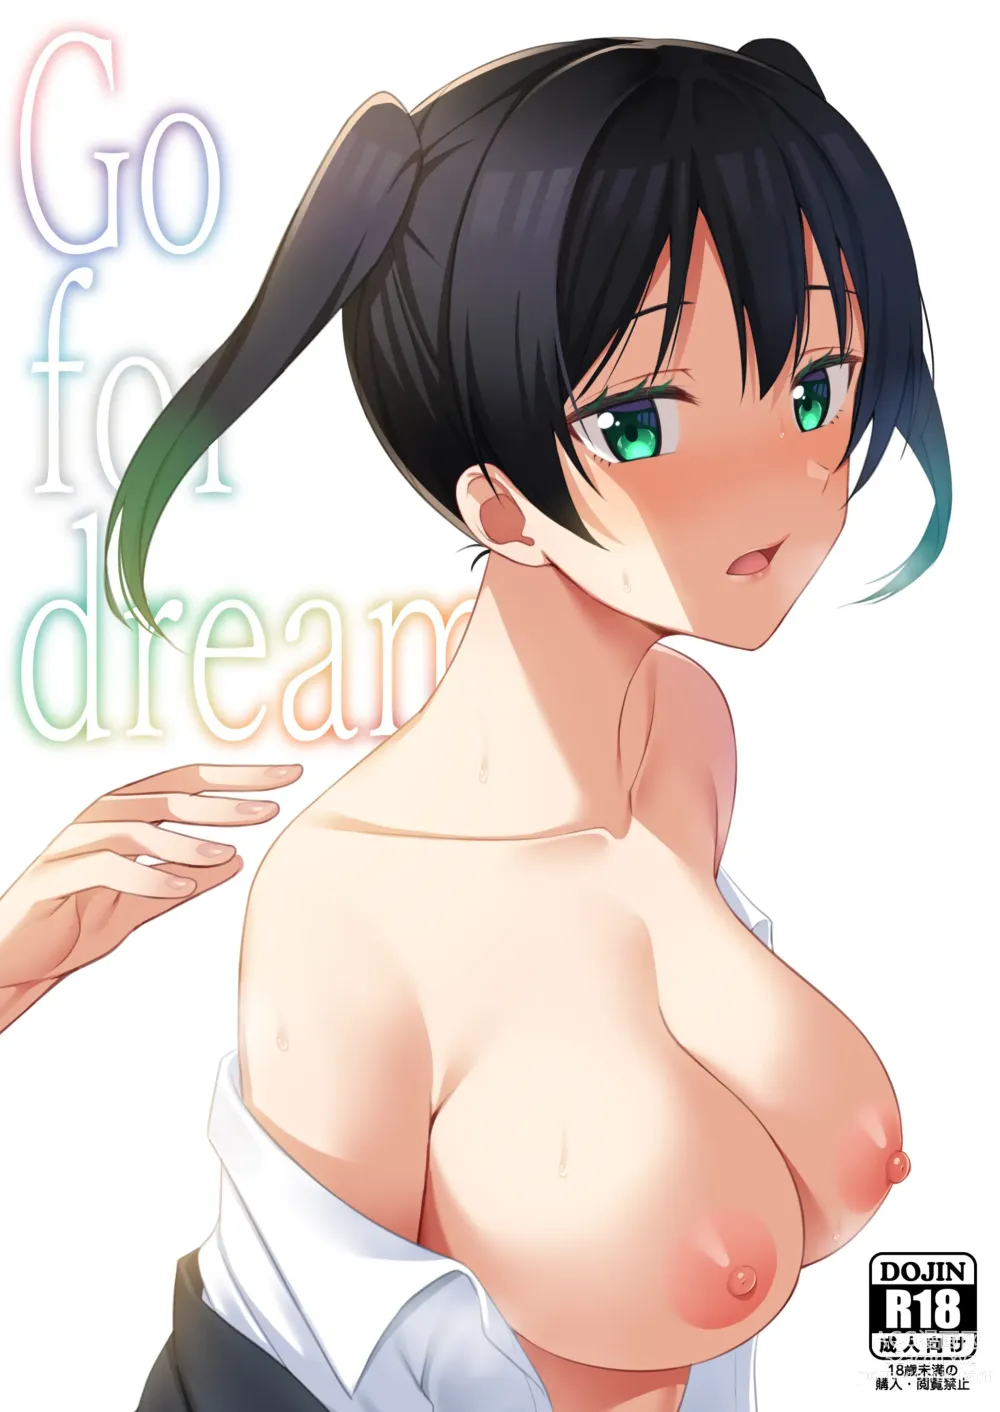 Page 1 of doujinshi Go for dream